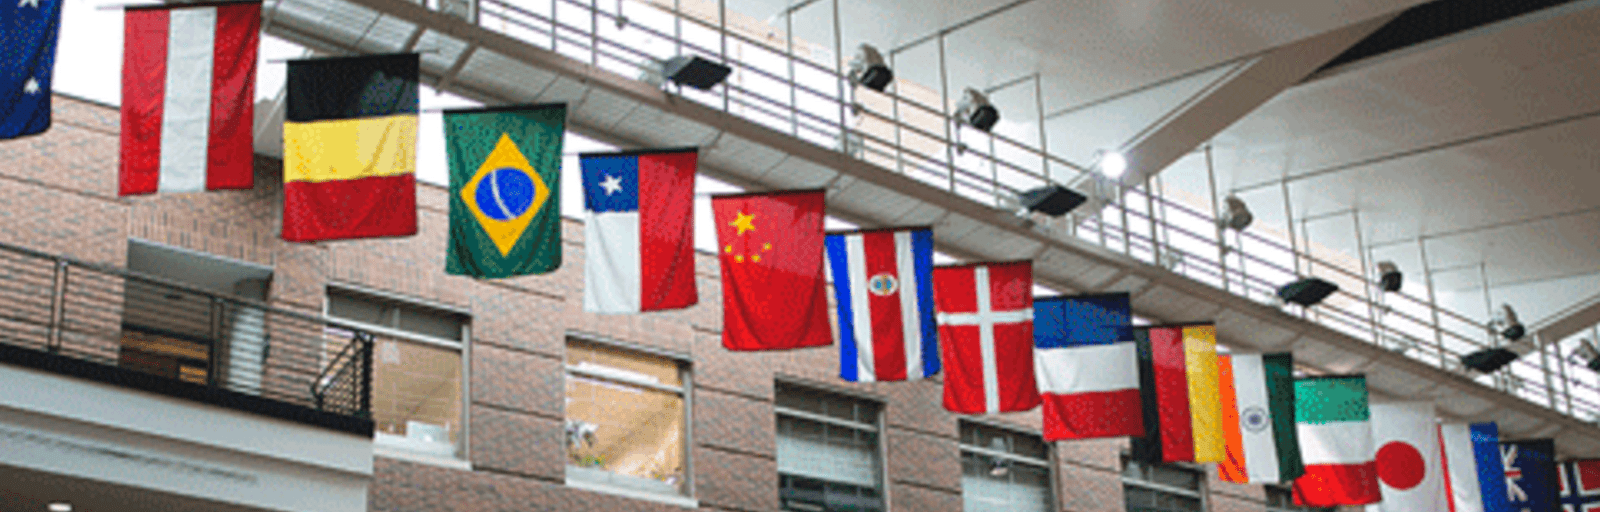 Flags in the Carlson School